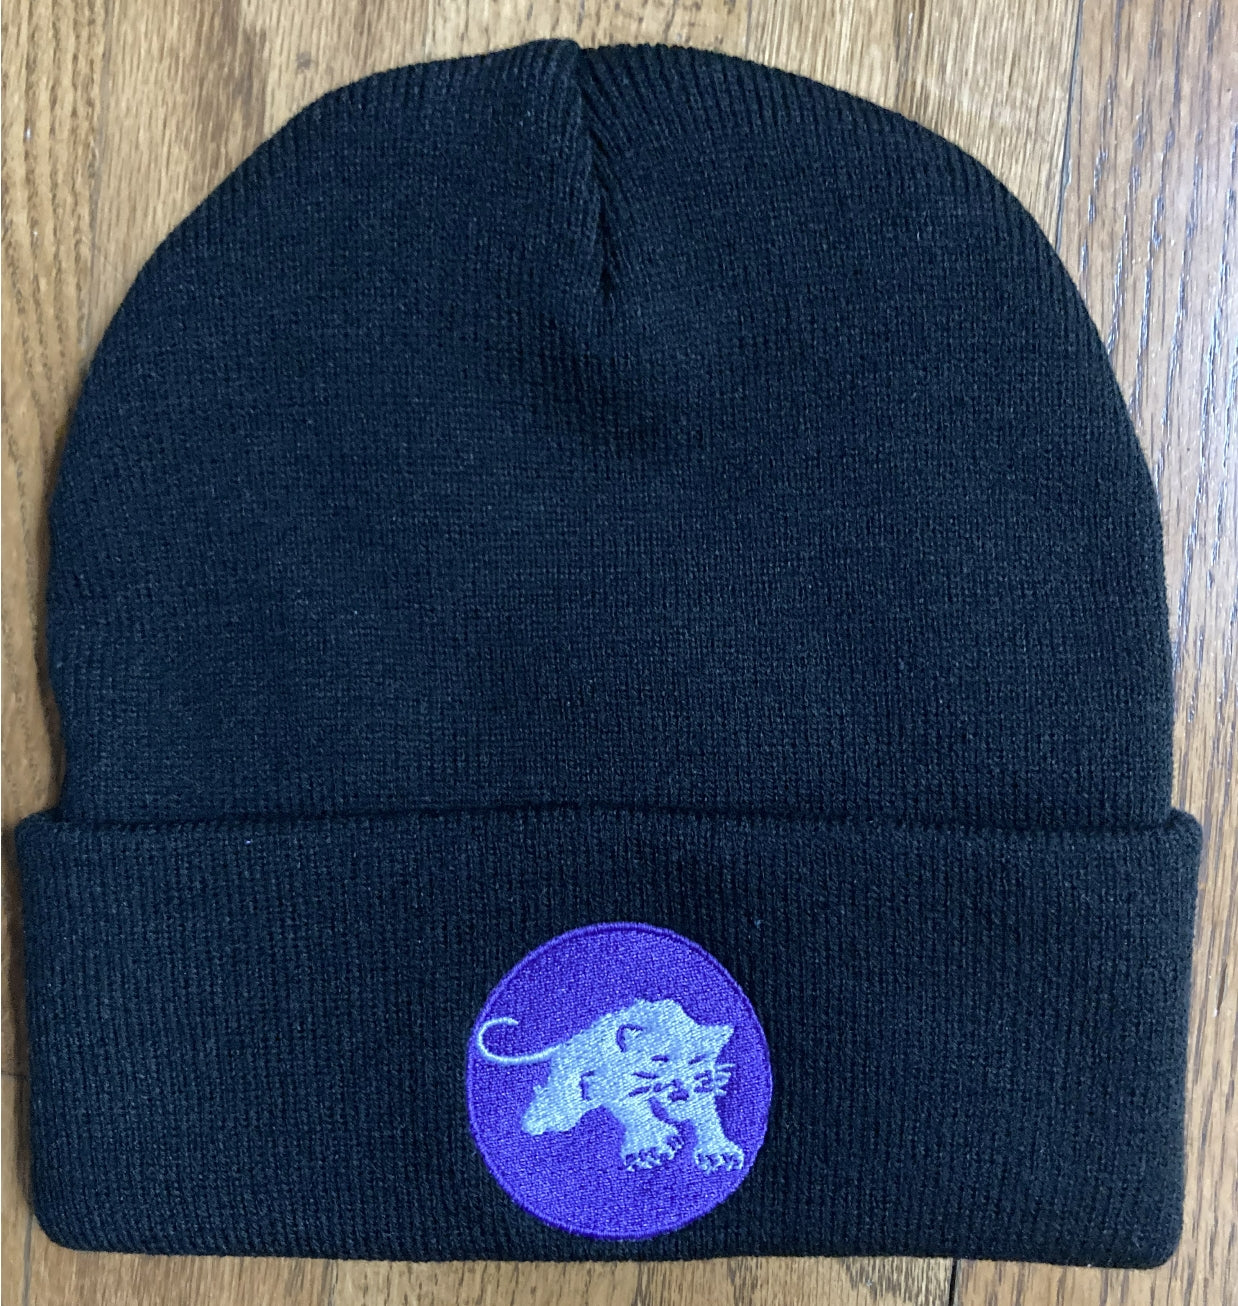 White Panther Beanies / Caps